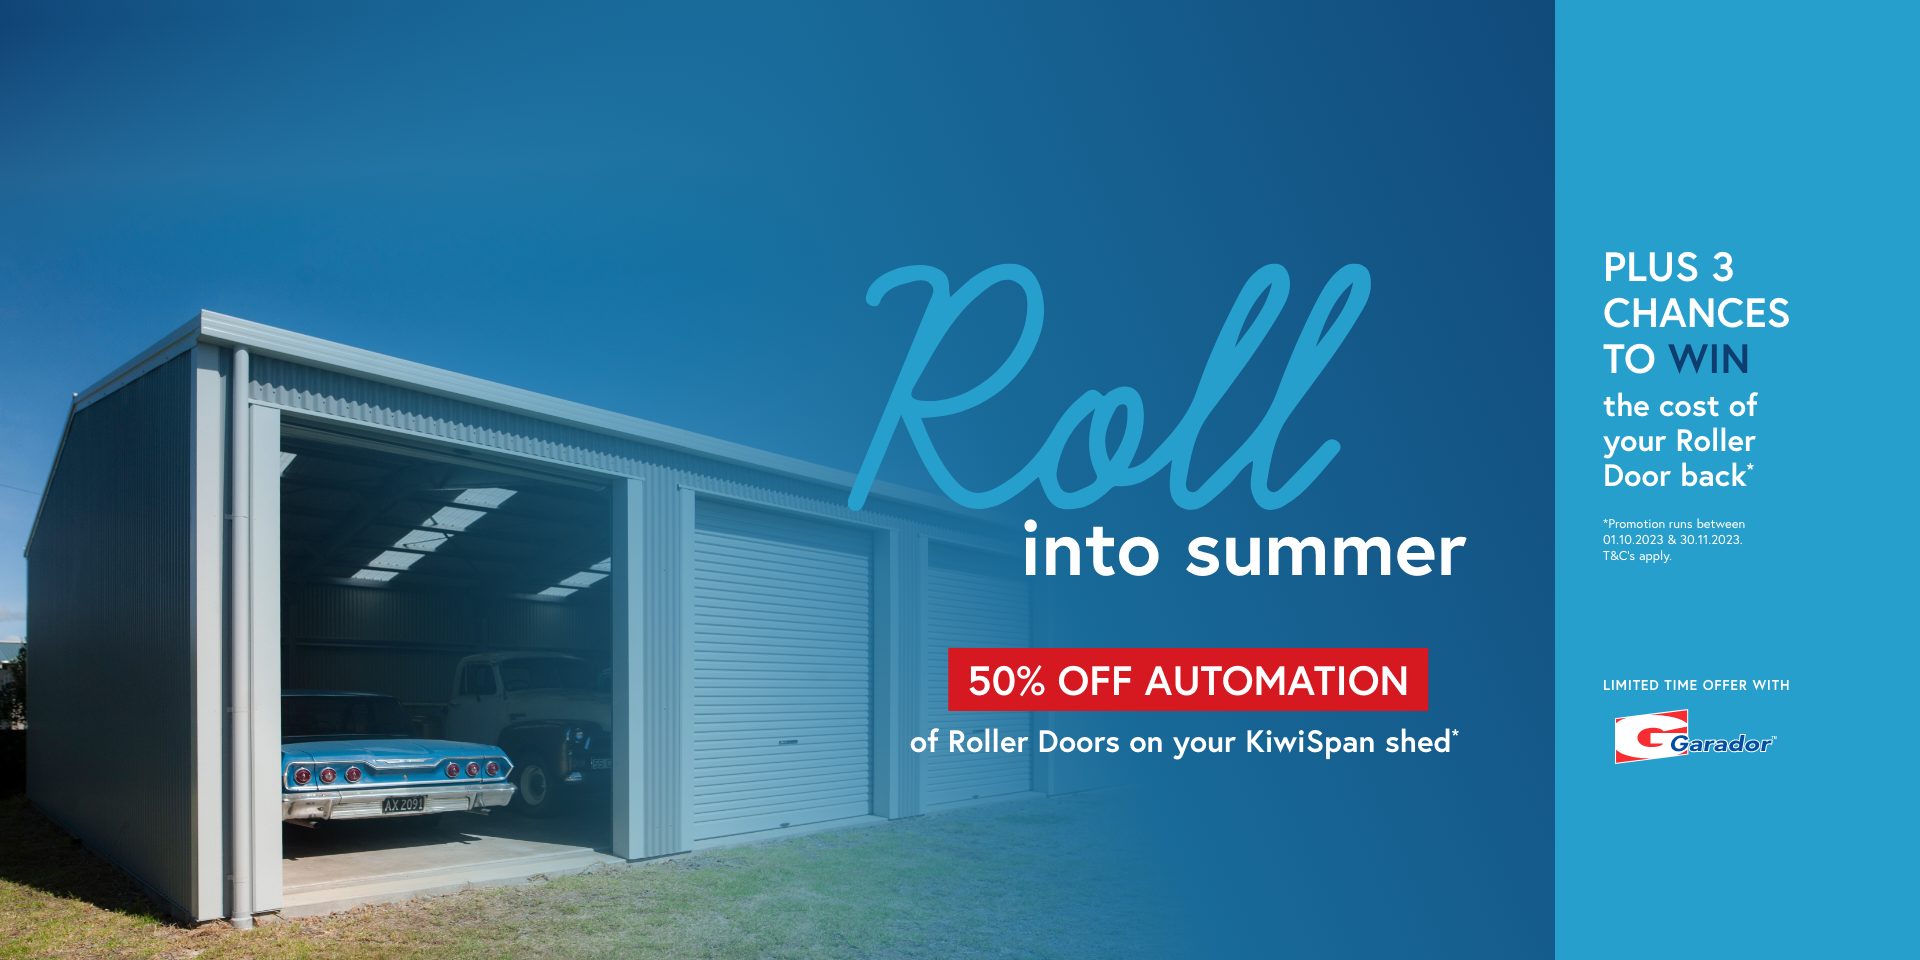 Roll into Summer promotion - 50% off automation of roller doors